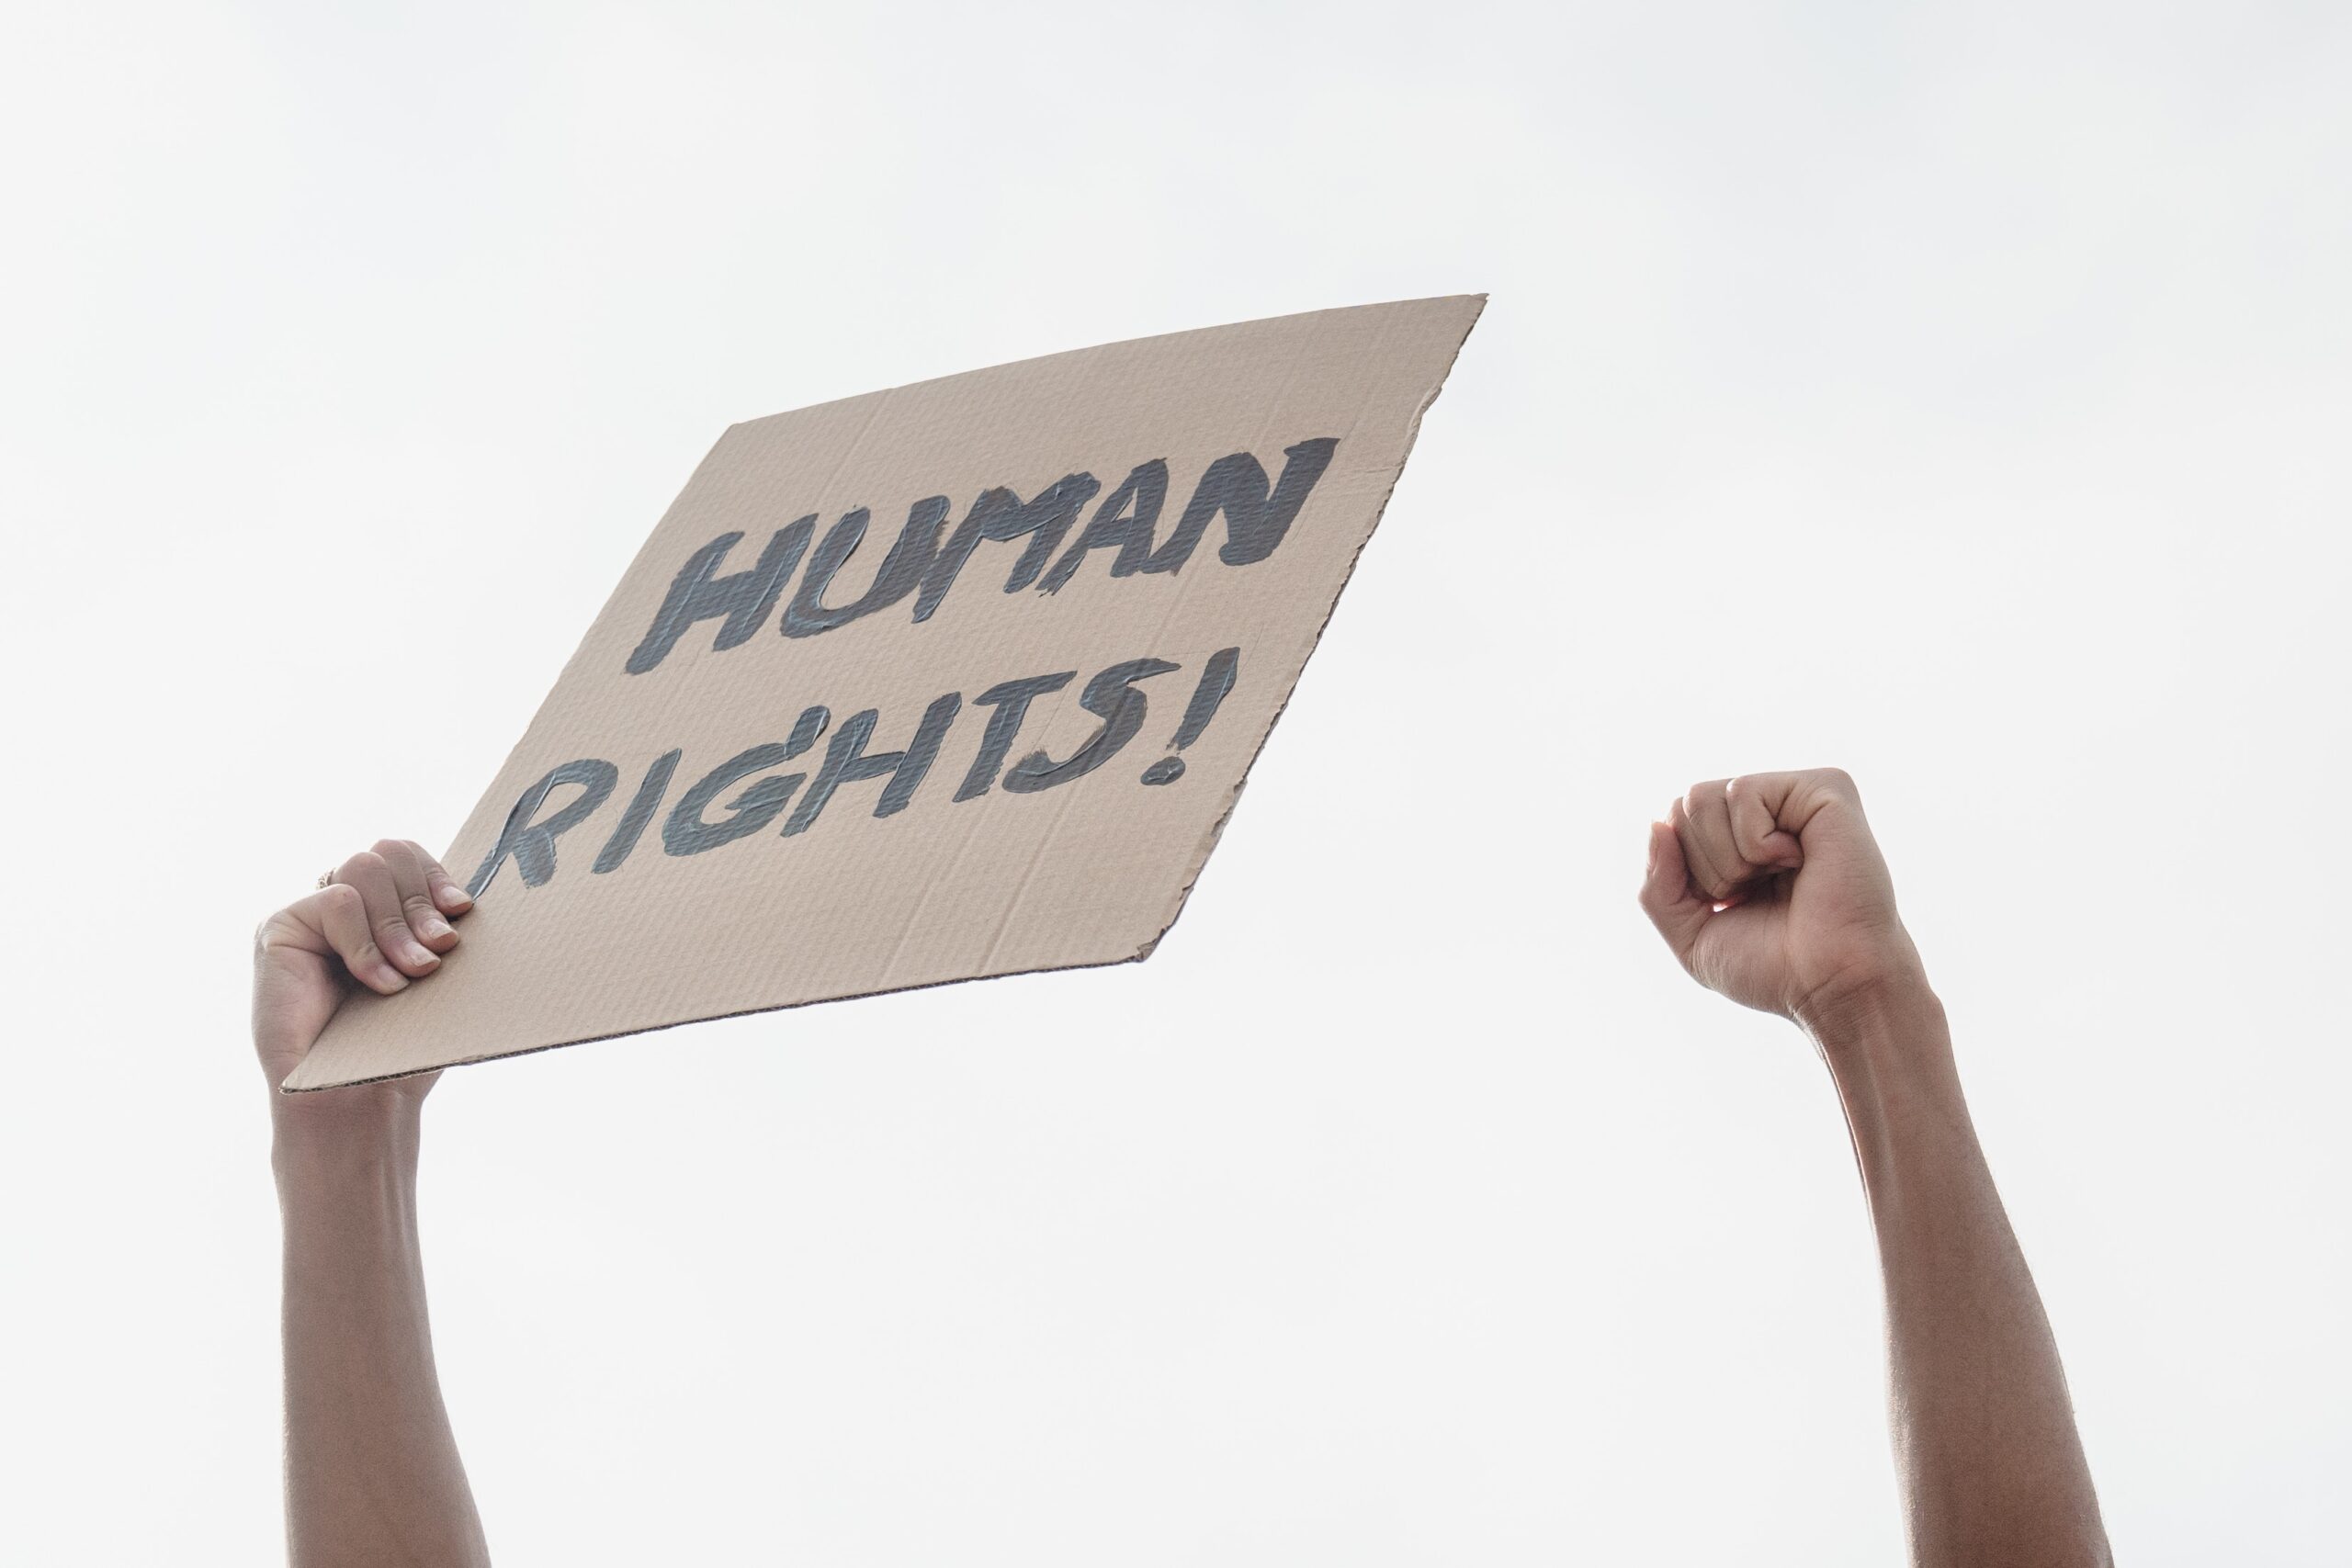 “Evaluating Consensus on Human Rights”